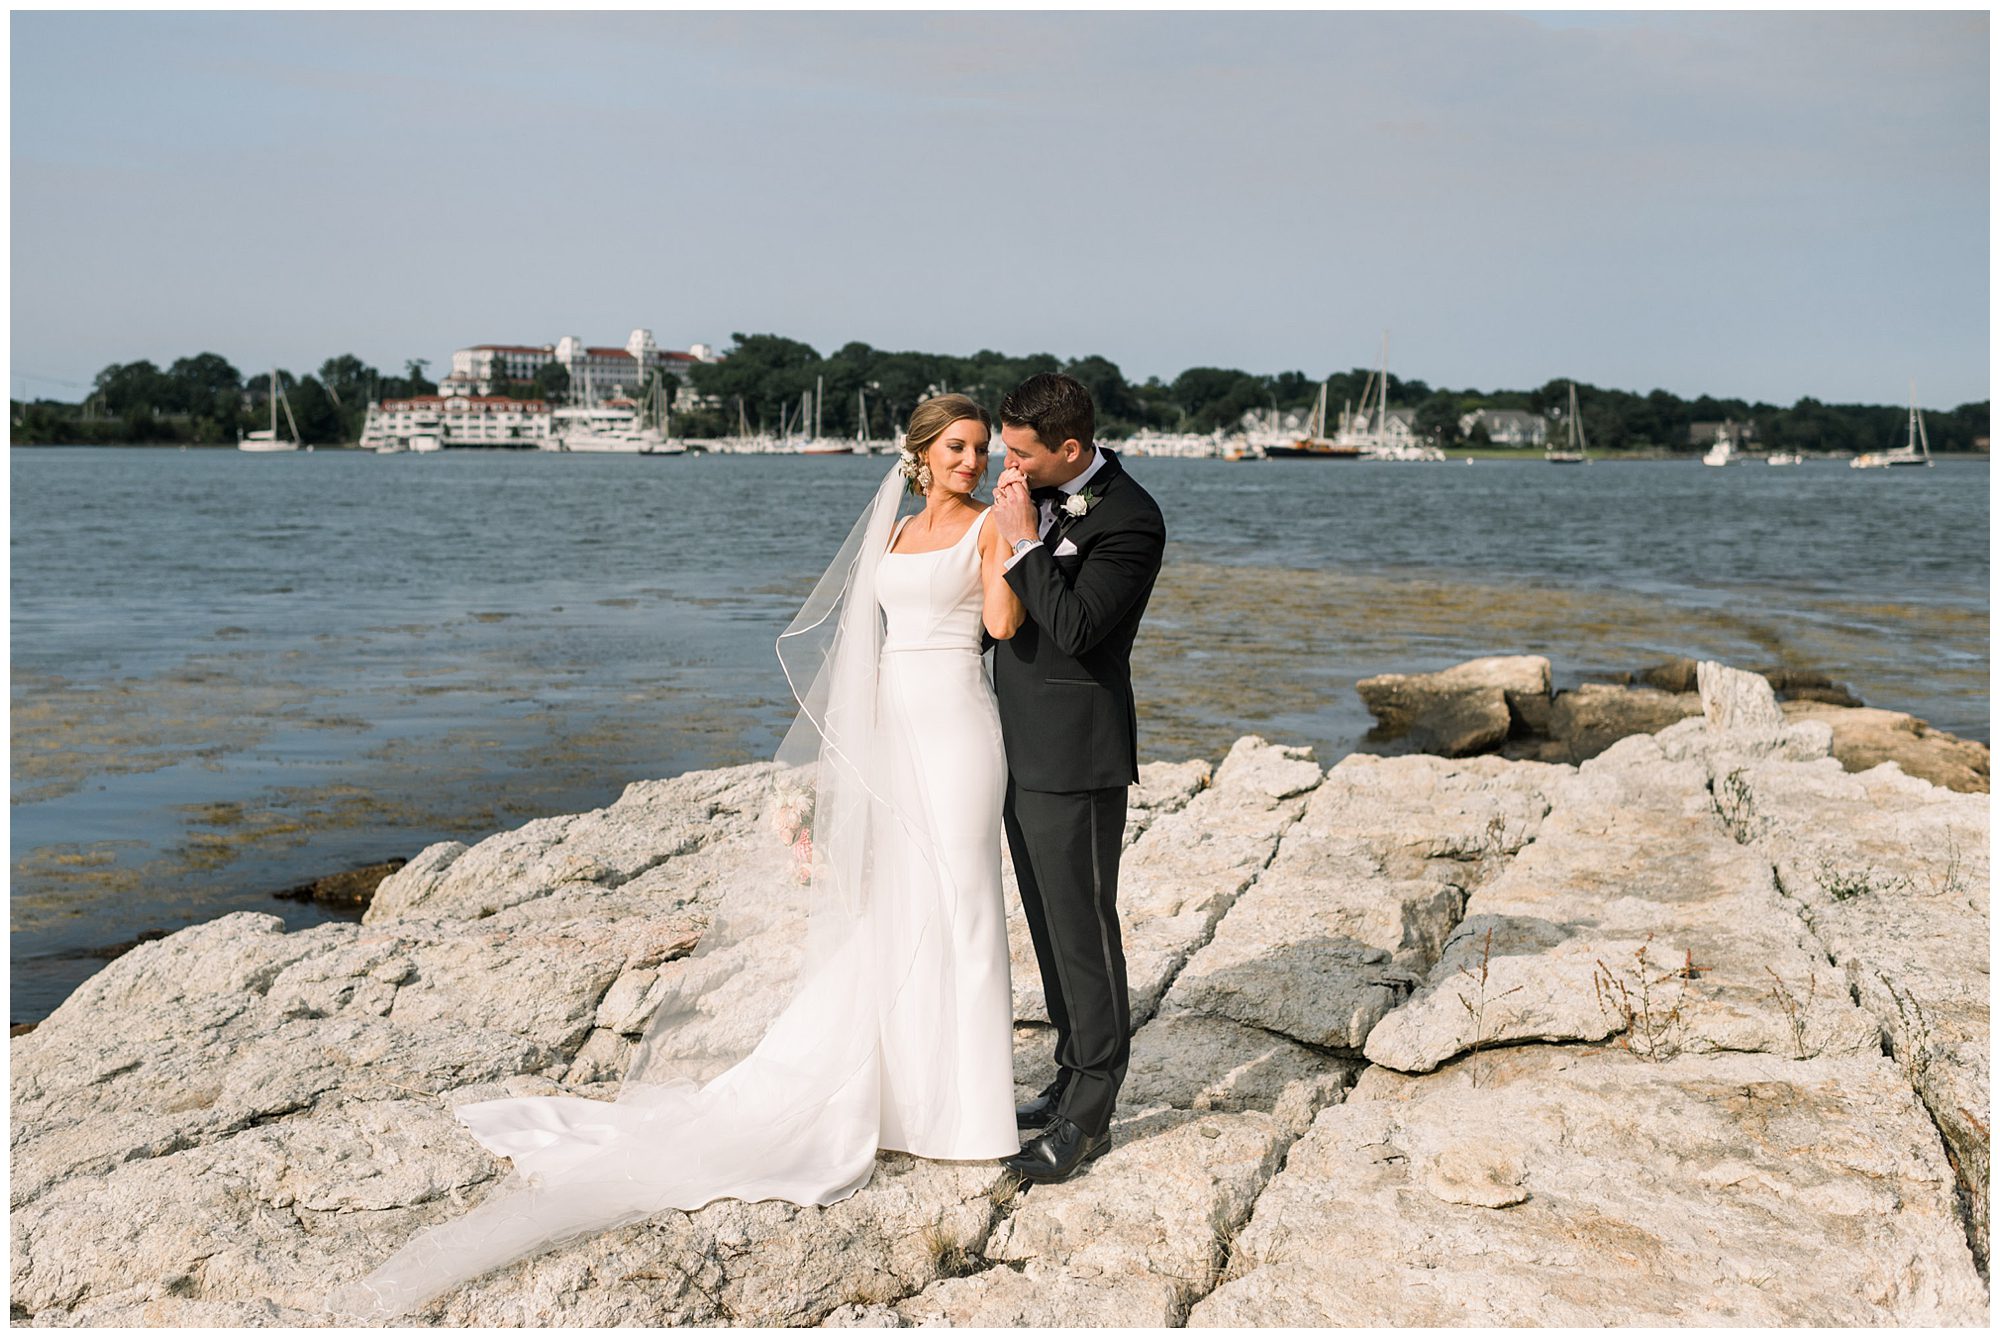 Michelle & Andrew's Wentworth Country Club Wedding in Rye, NH